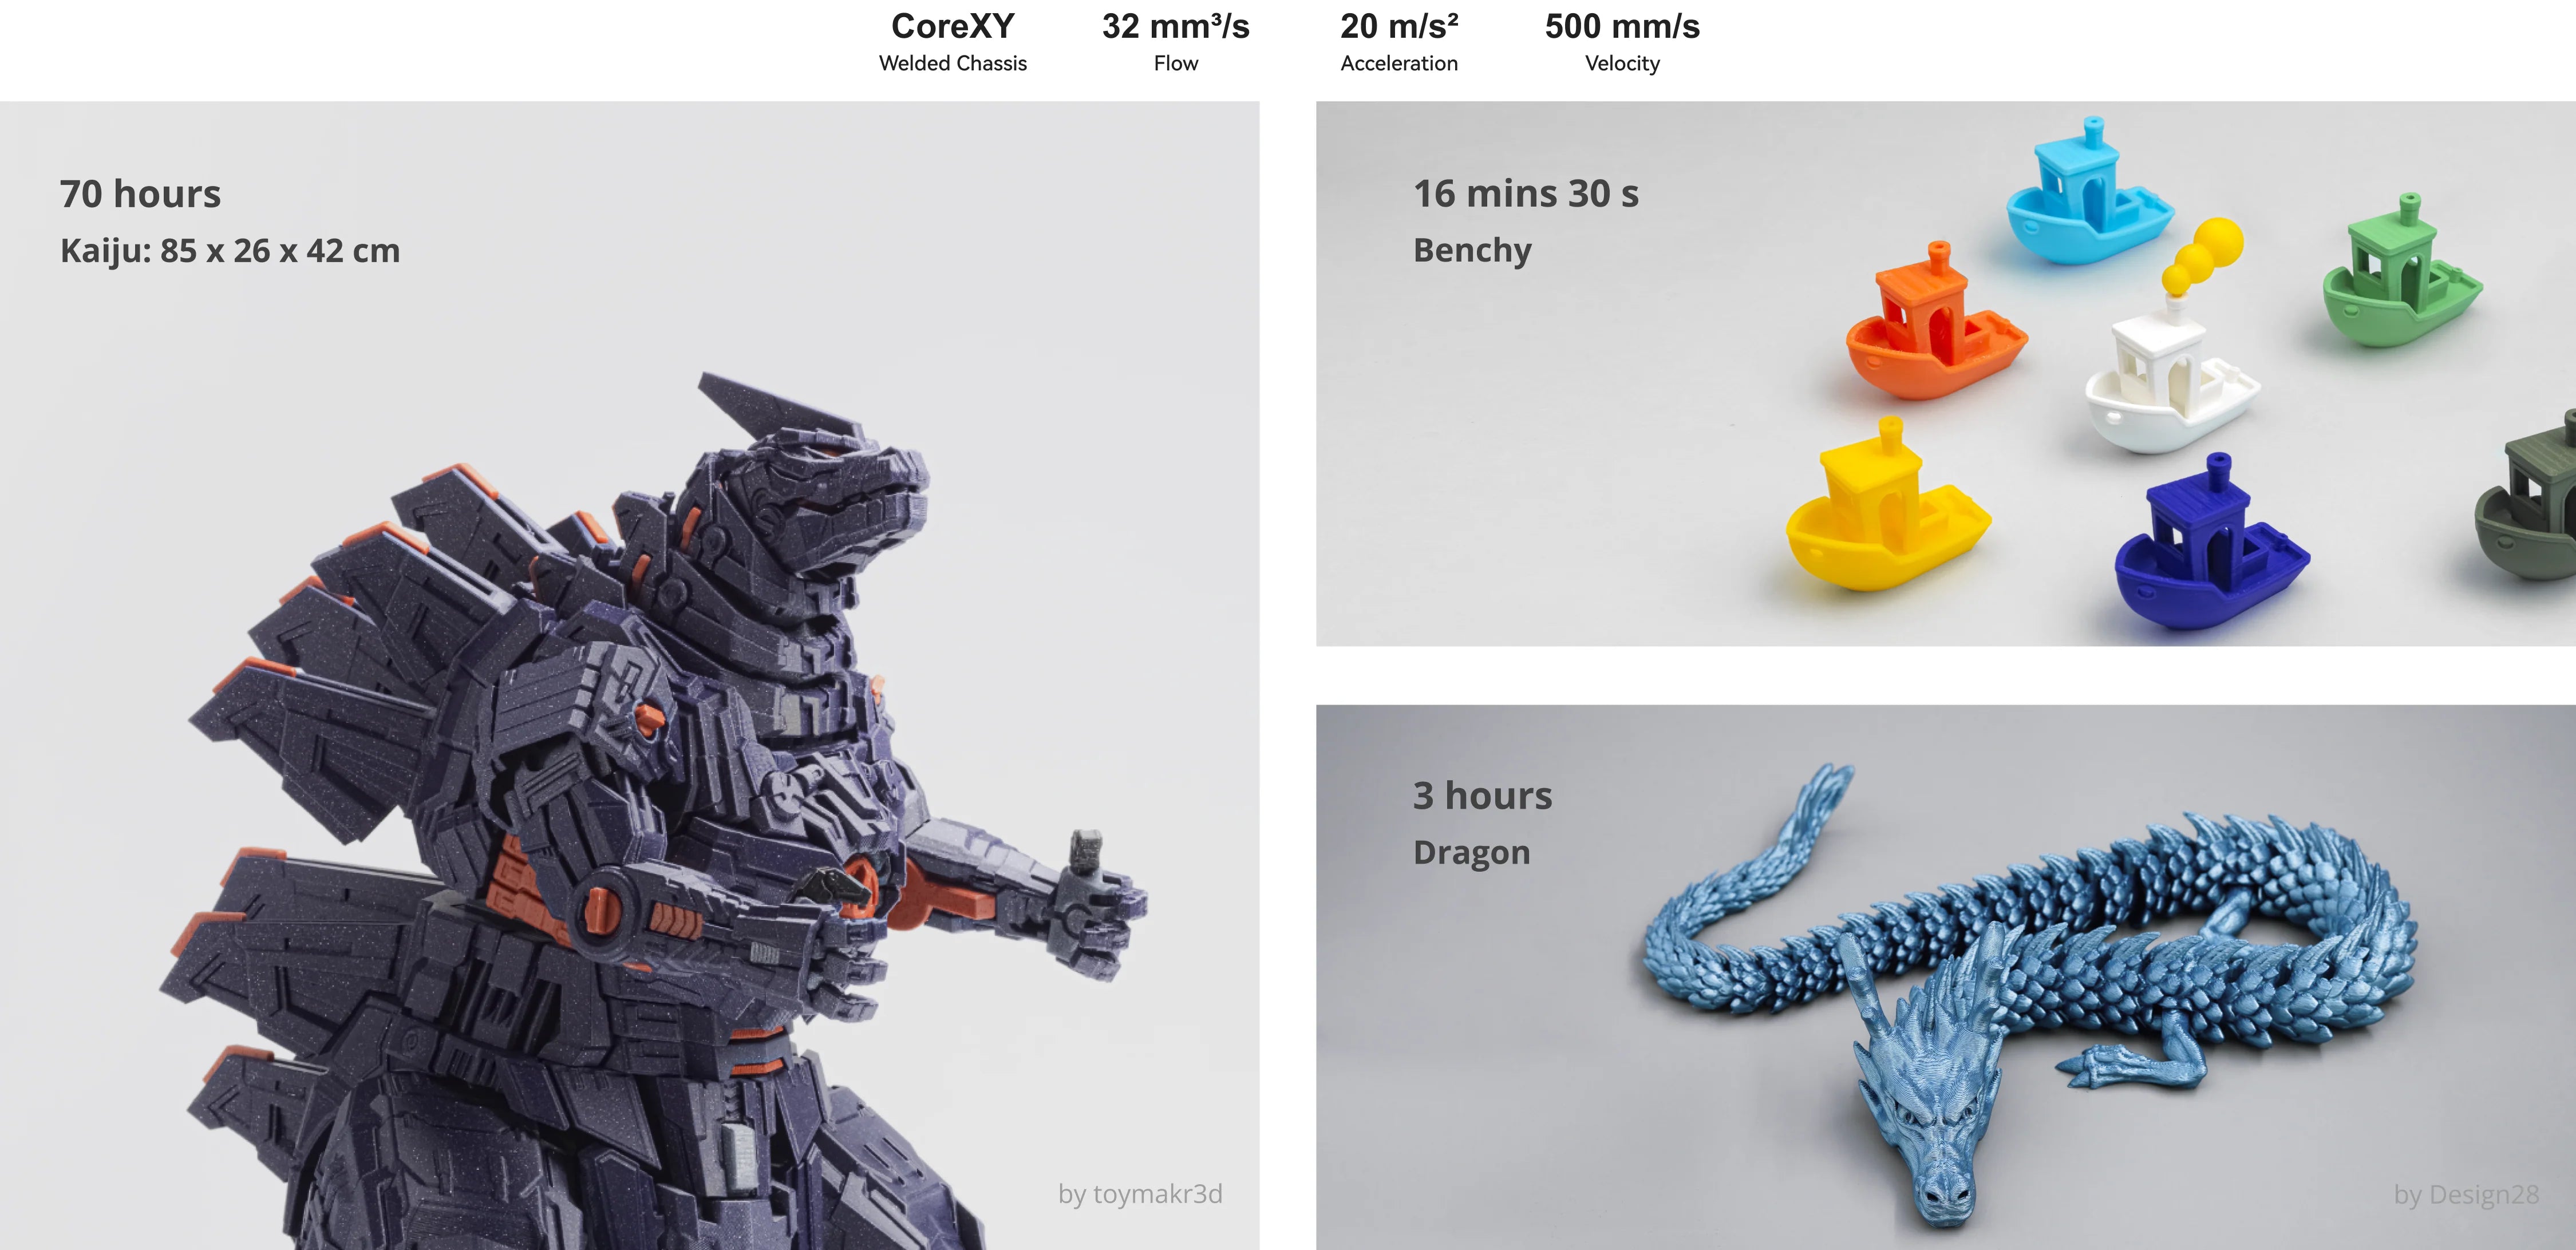 3d print speed examples